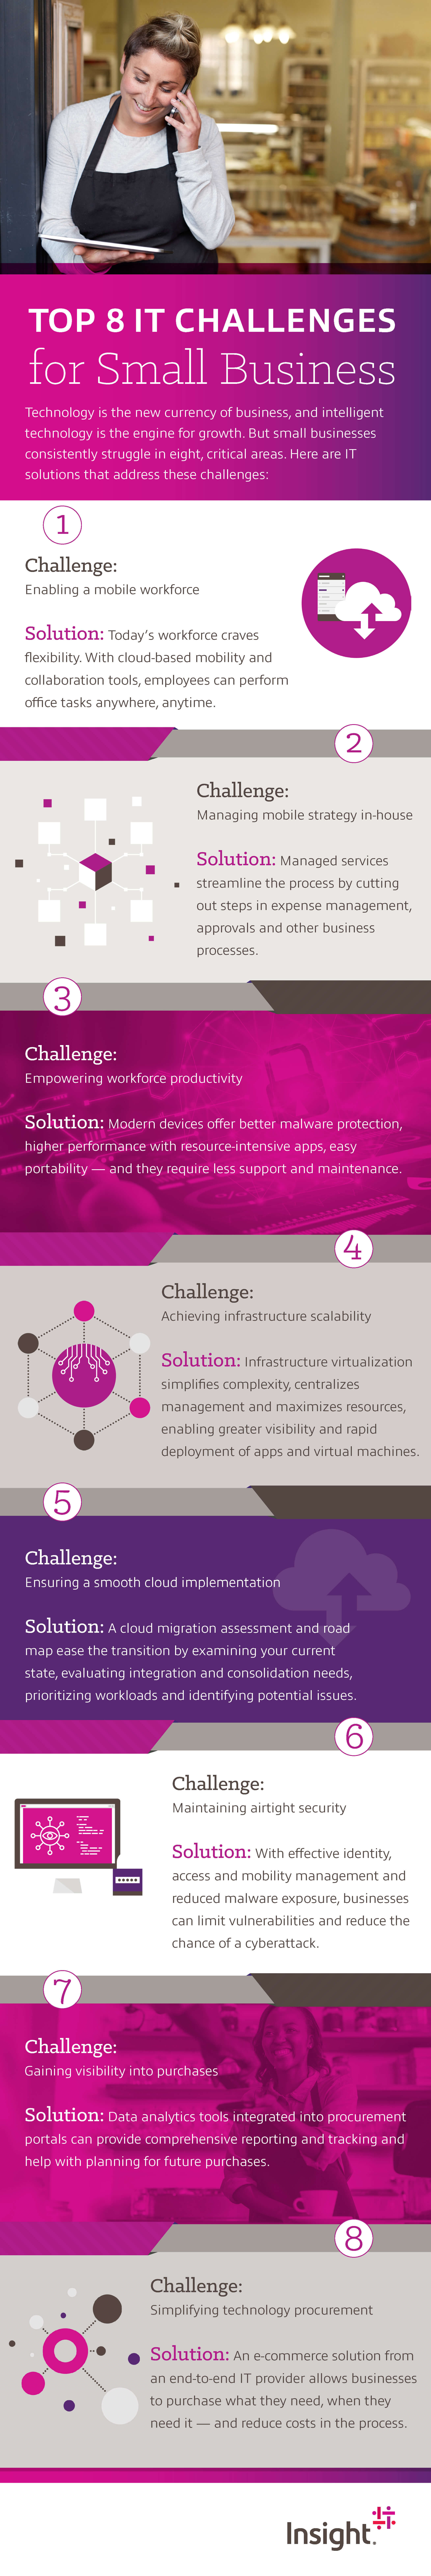 Infographic displaying Top 8 IT Challenges for Small Business. Translated below.